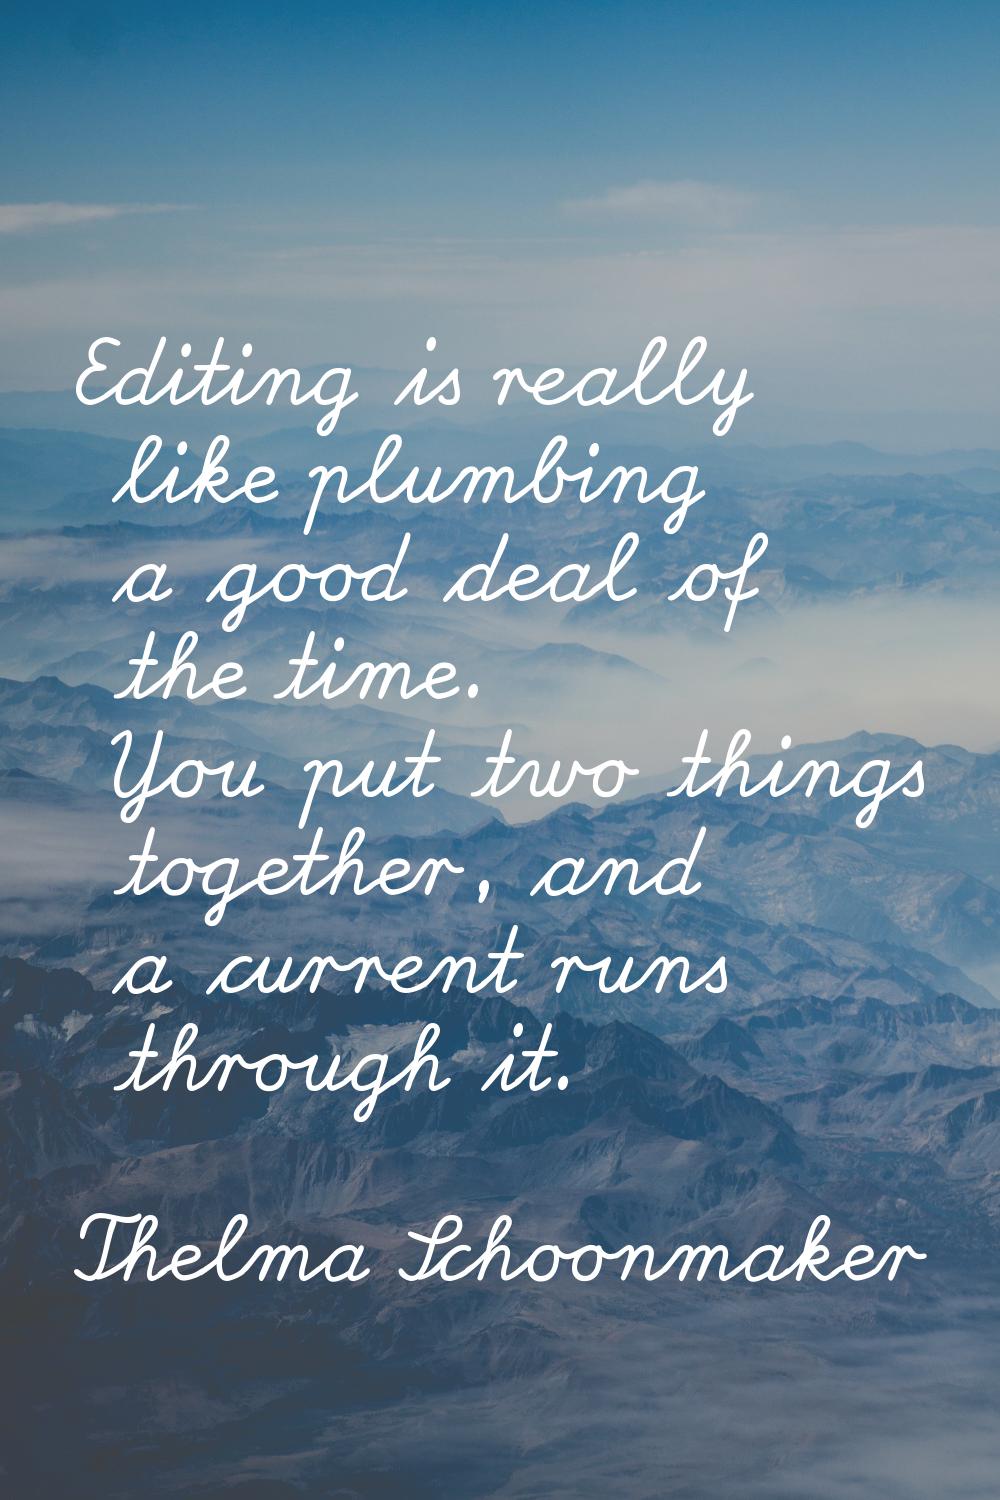 Editing is really like plumbing a good deal of the time. You put two things together, and a current